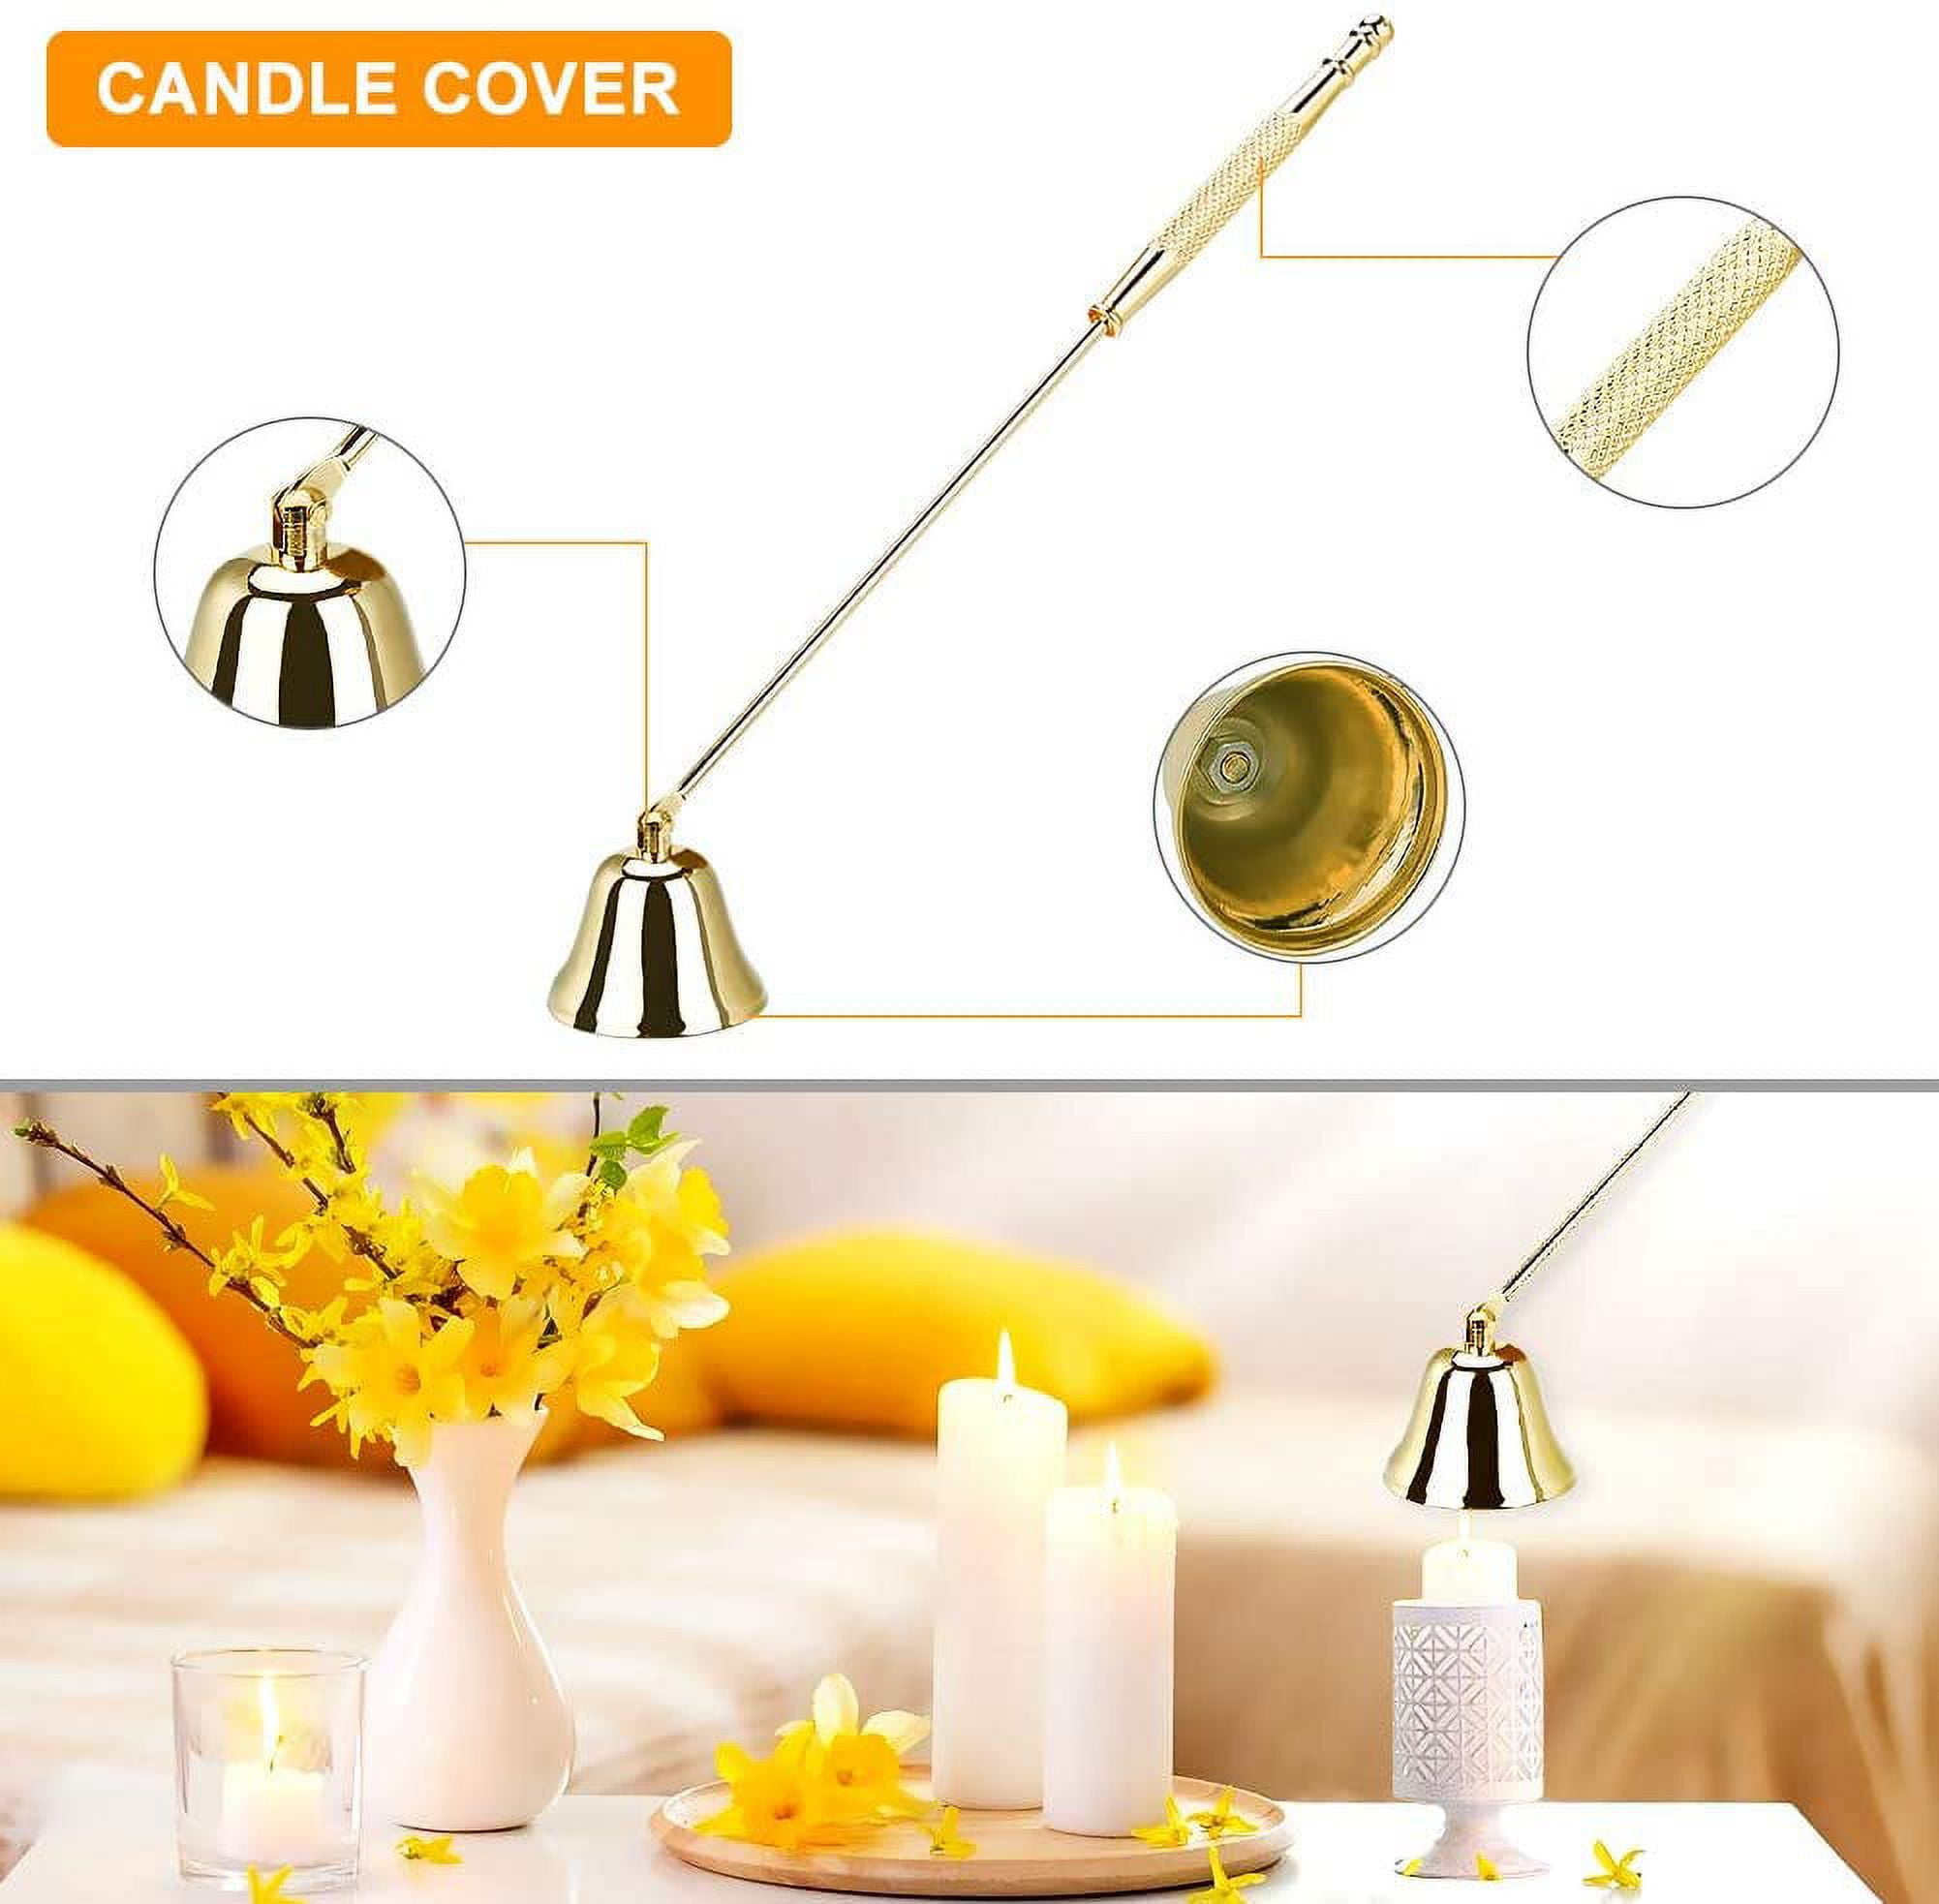 3 Piece DW Home Candle Accessories - Wick Trimmer, Candle Snuffer & Wick  Dipper